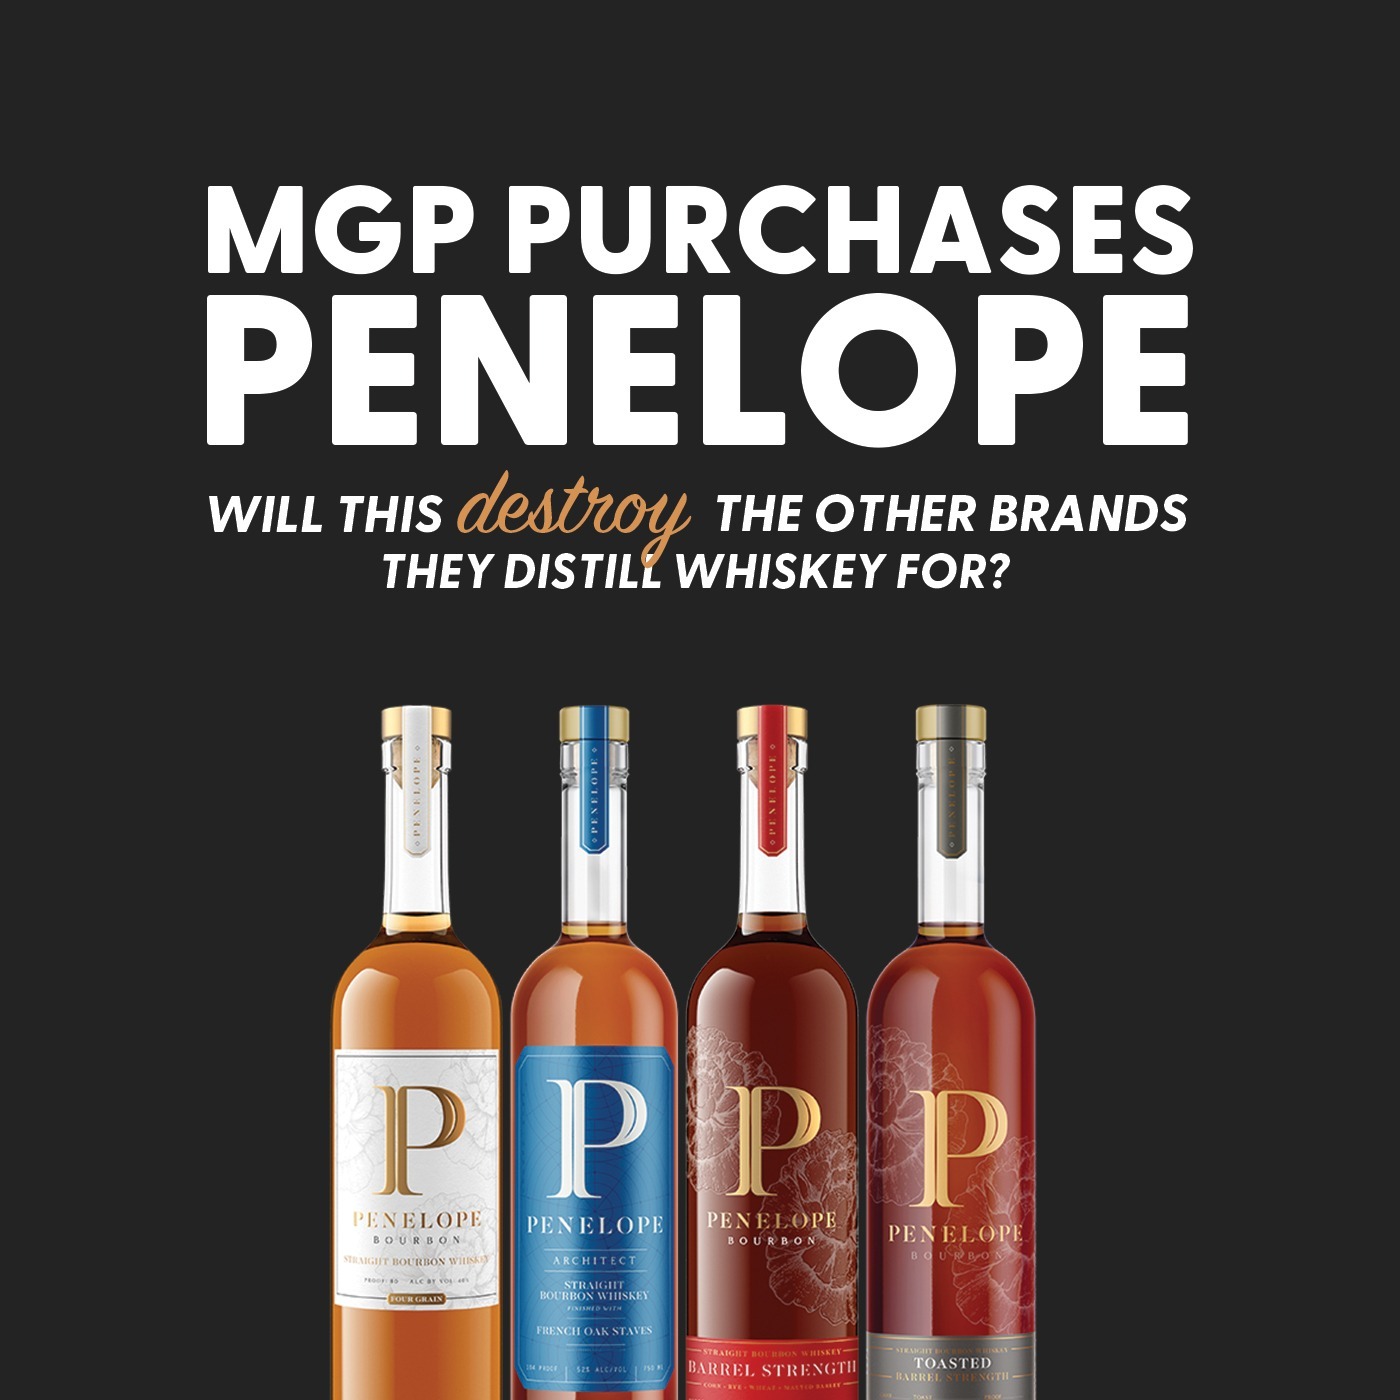 Will MGP's Purchase of Penelope DESTROY Your Favorite Brand of Whiskey?